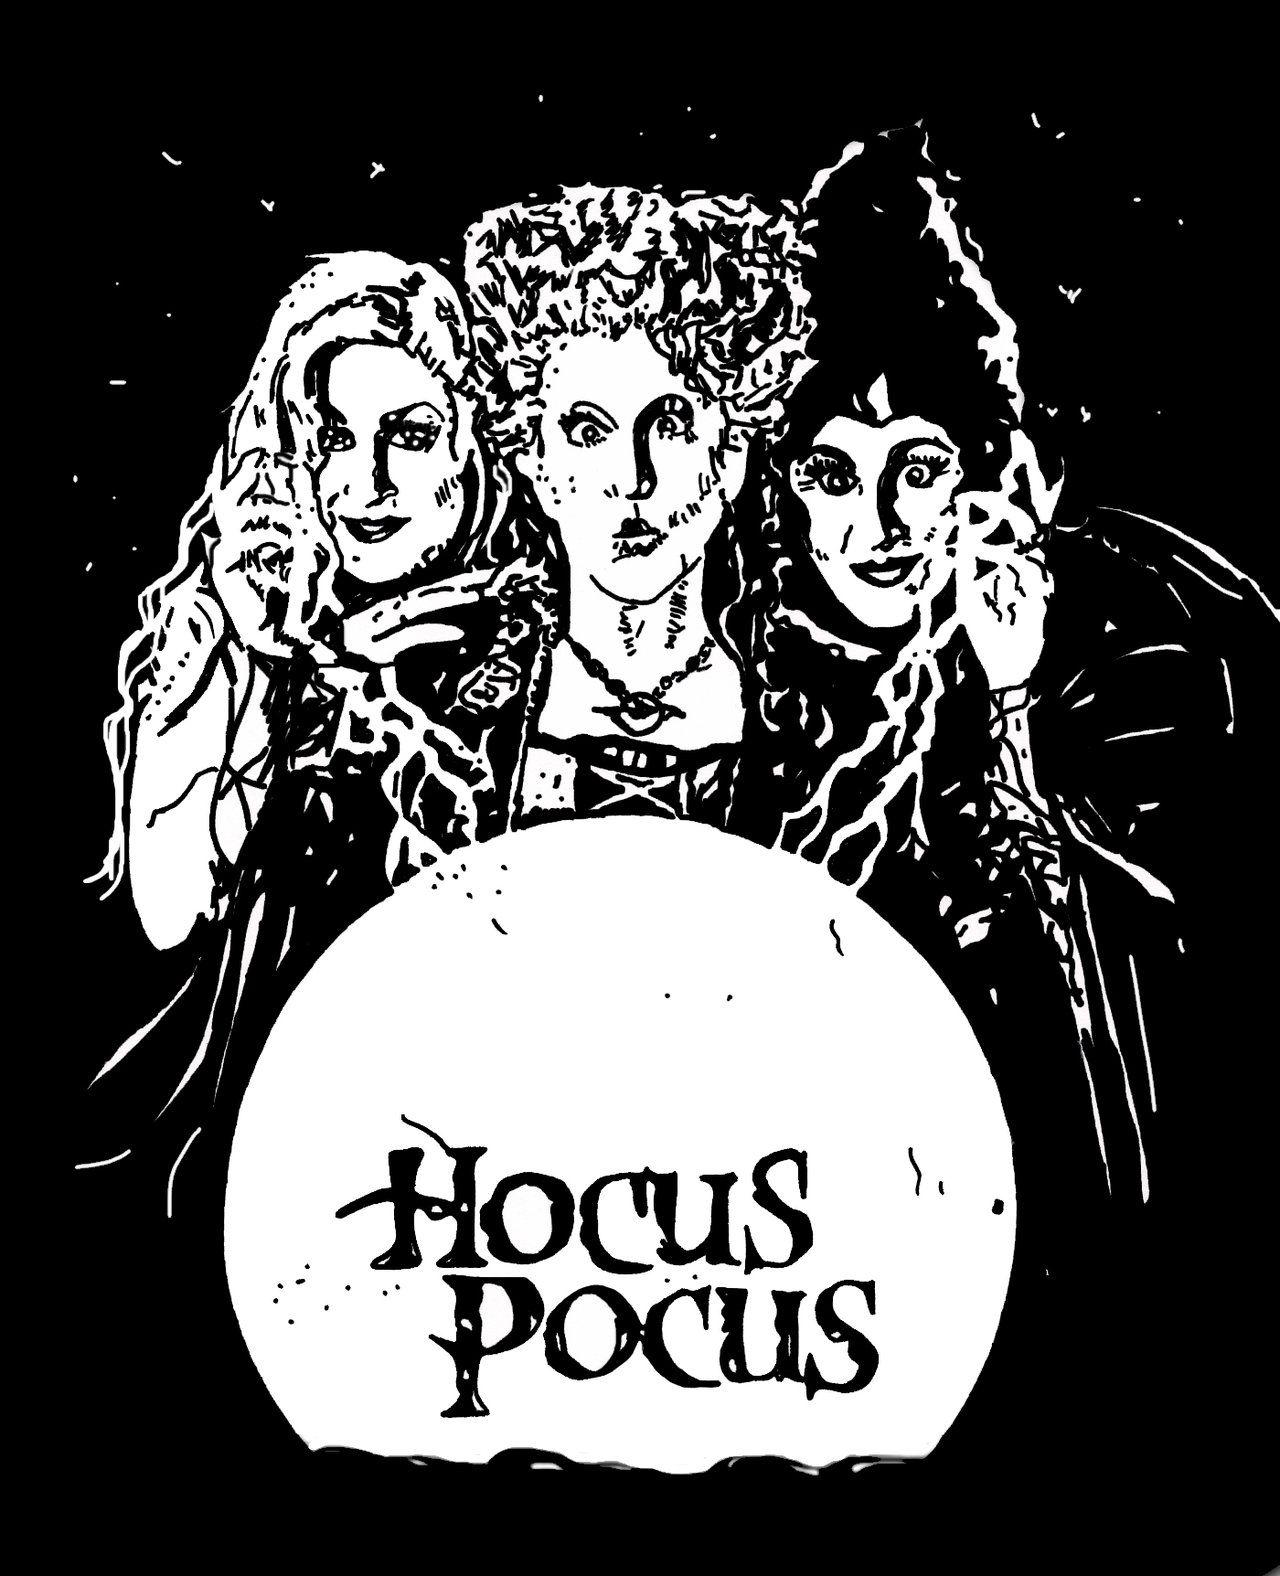 HD Wallpaper Hocus Pocus Coloring Pages Wallpaper High Quality